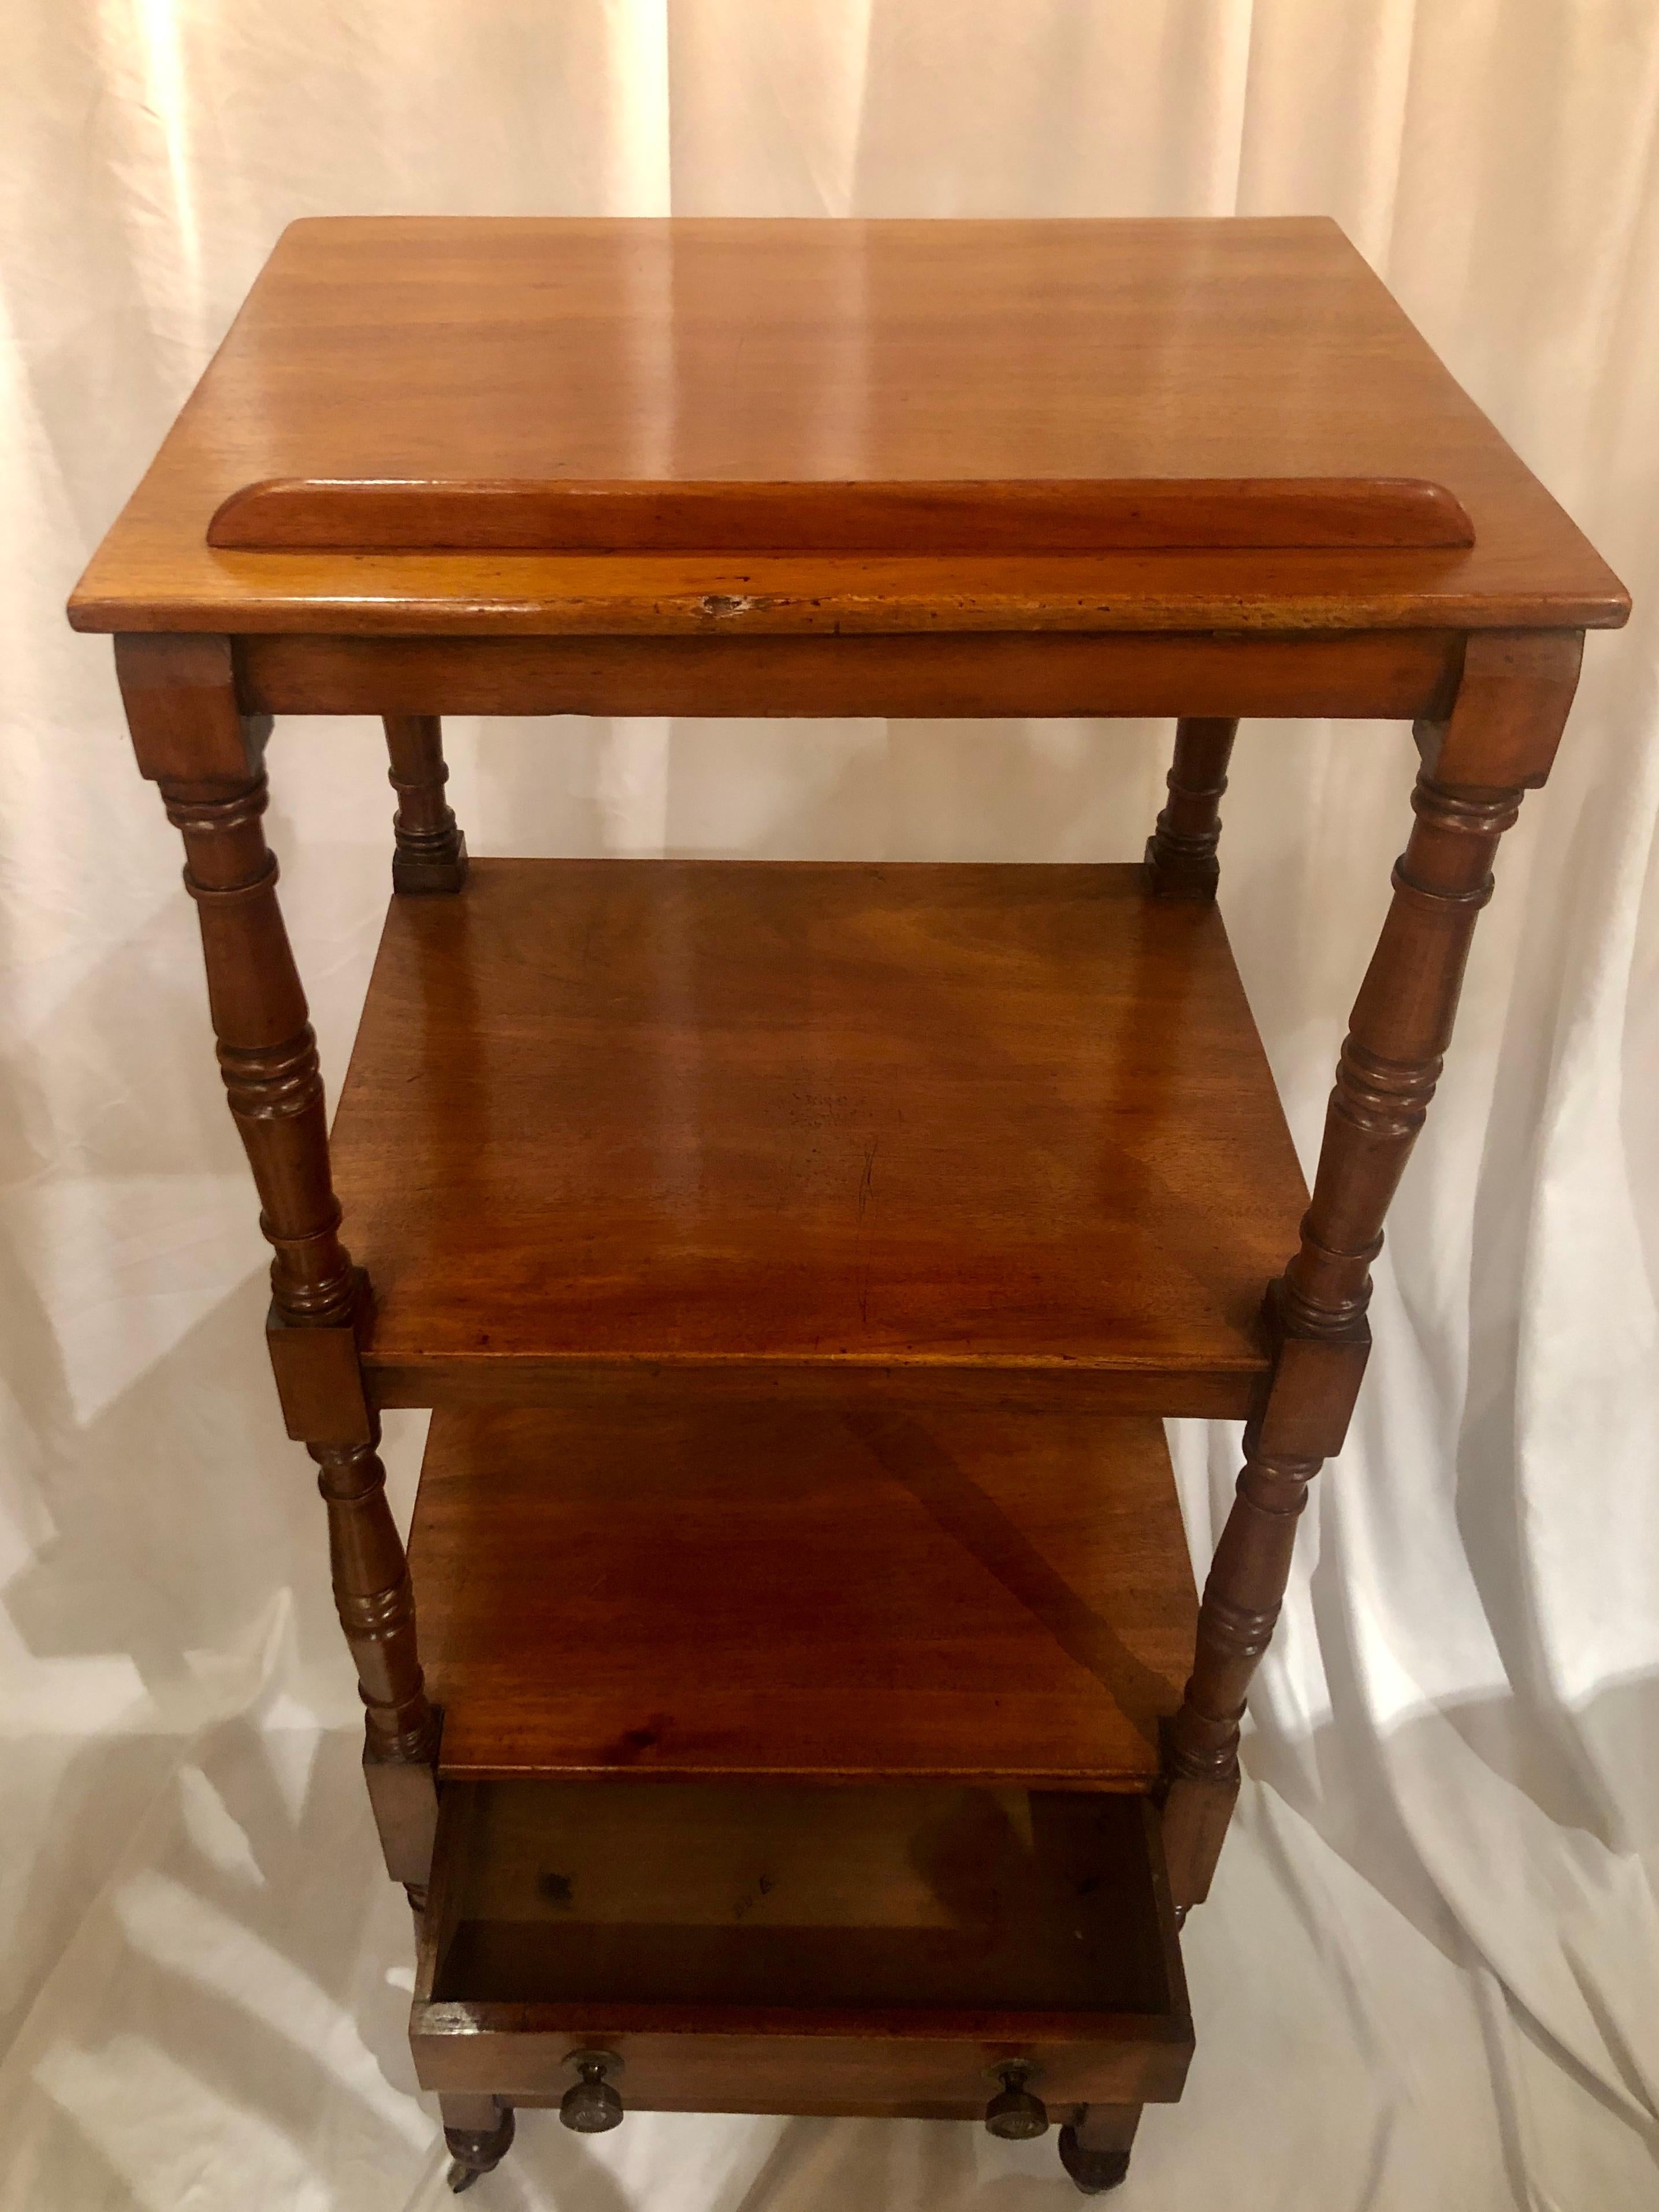 Antique English Mahogany Etagere with Lectern, Circa 1840-1860 For Sale 1